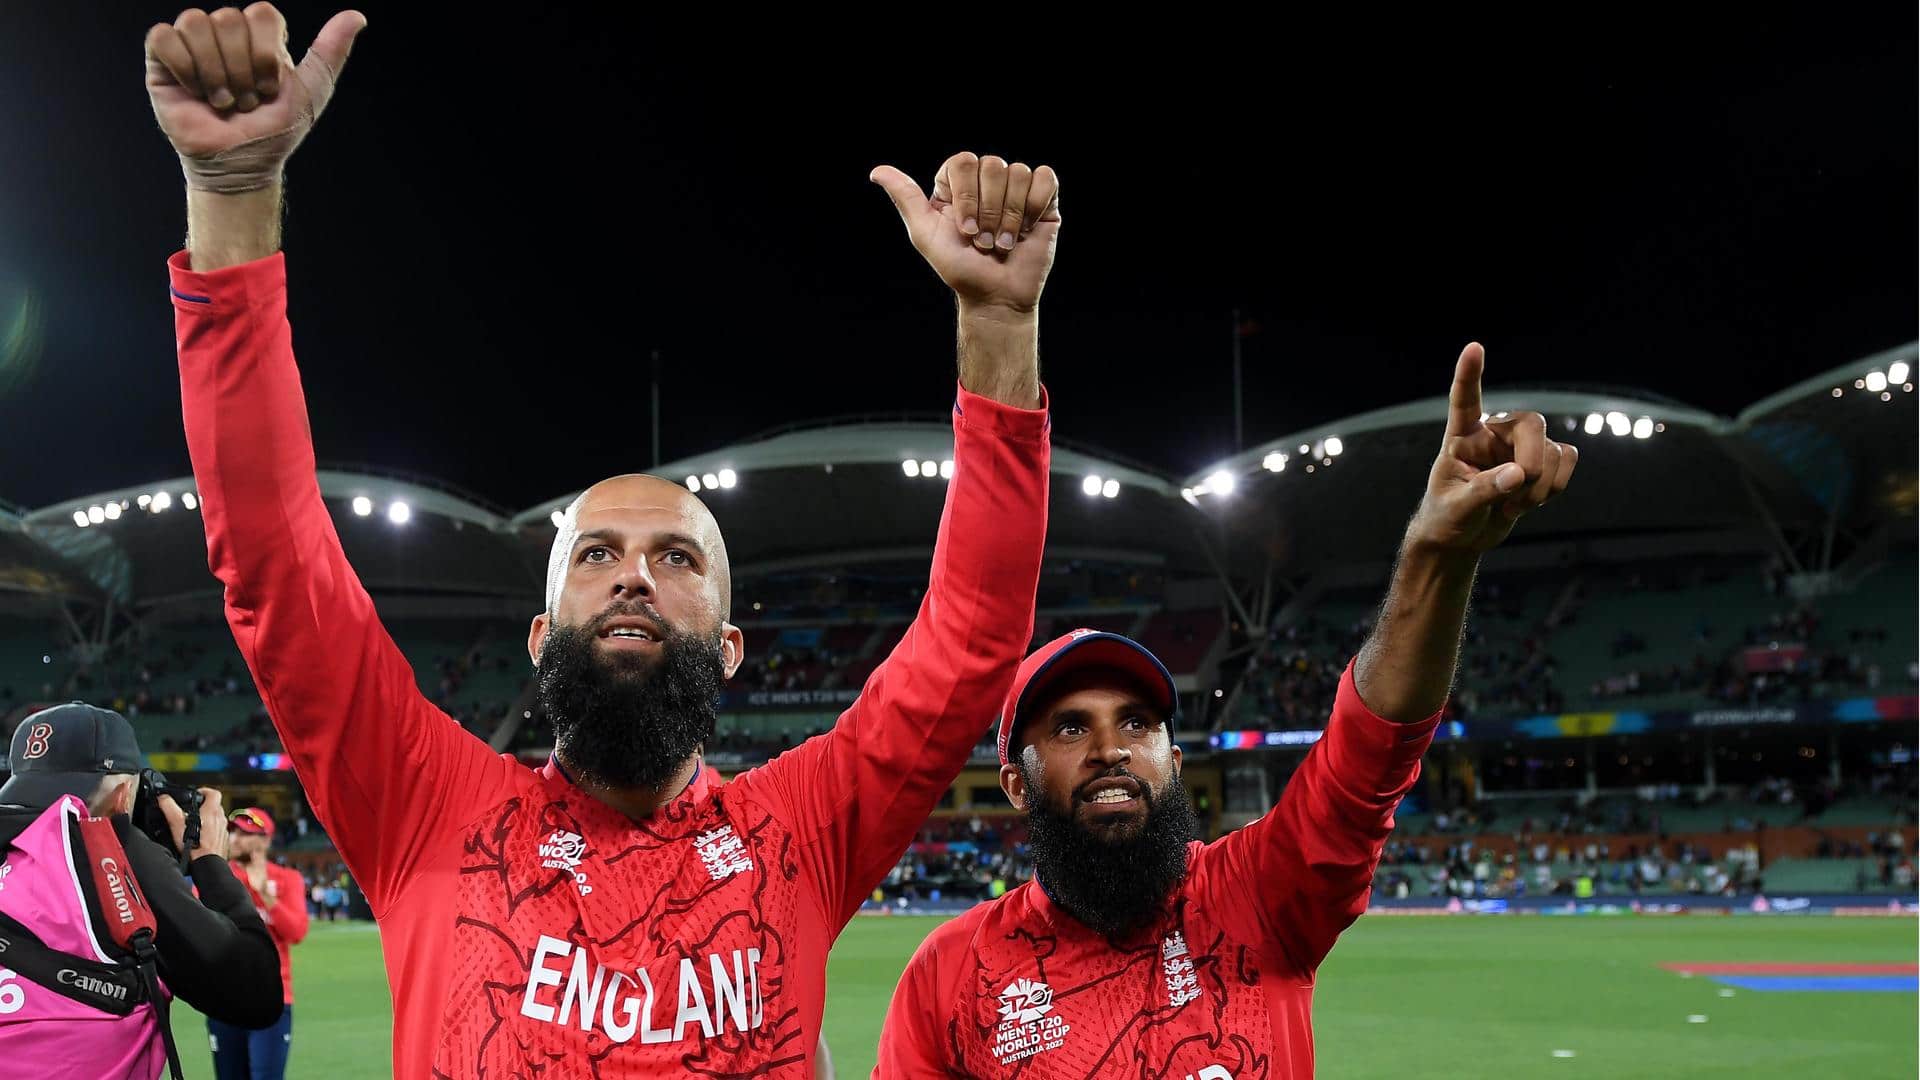 2022 T20 World Cup: England thrash India to reach final